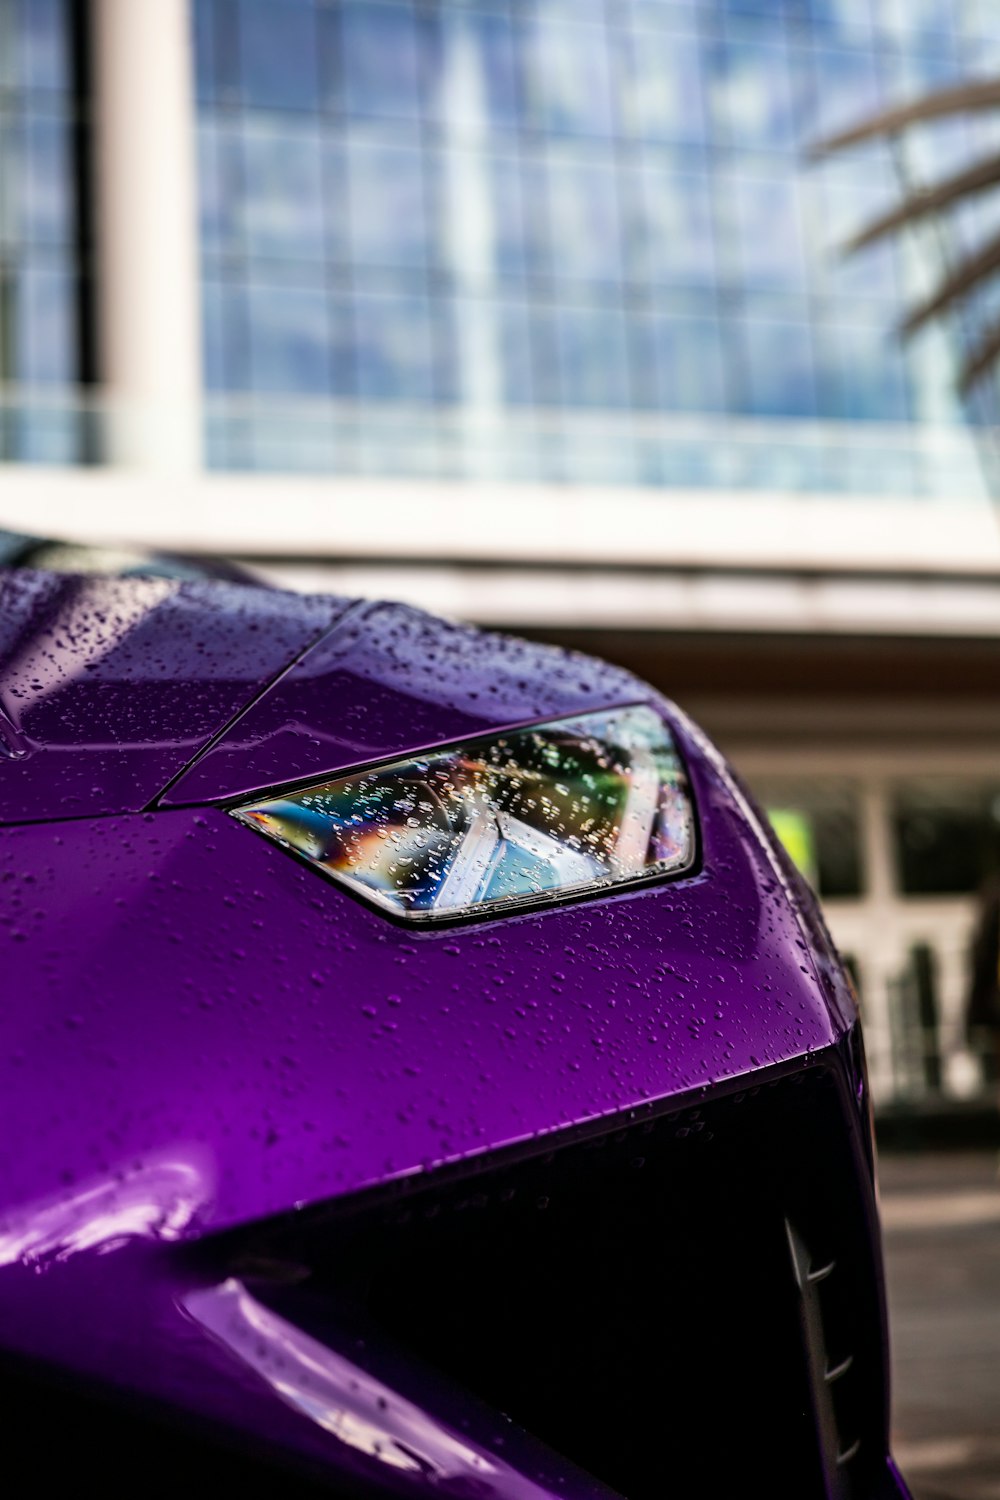 a close up of a purple car with a building in the background